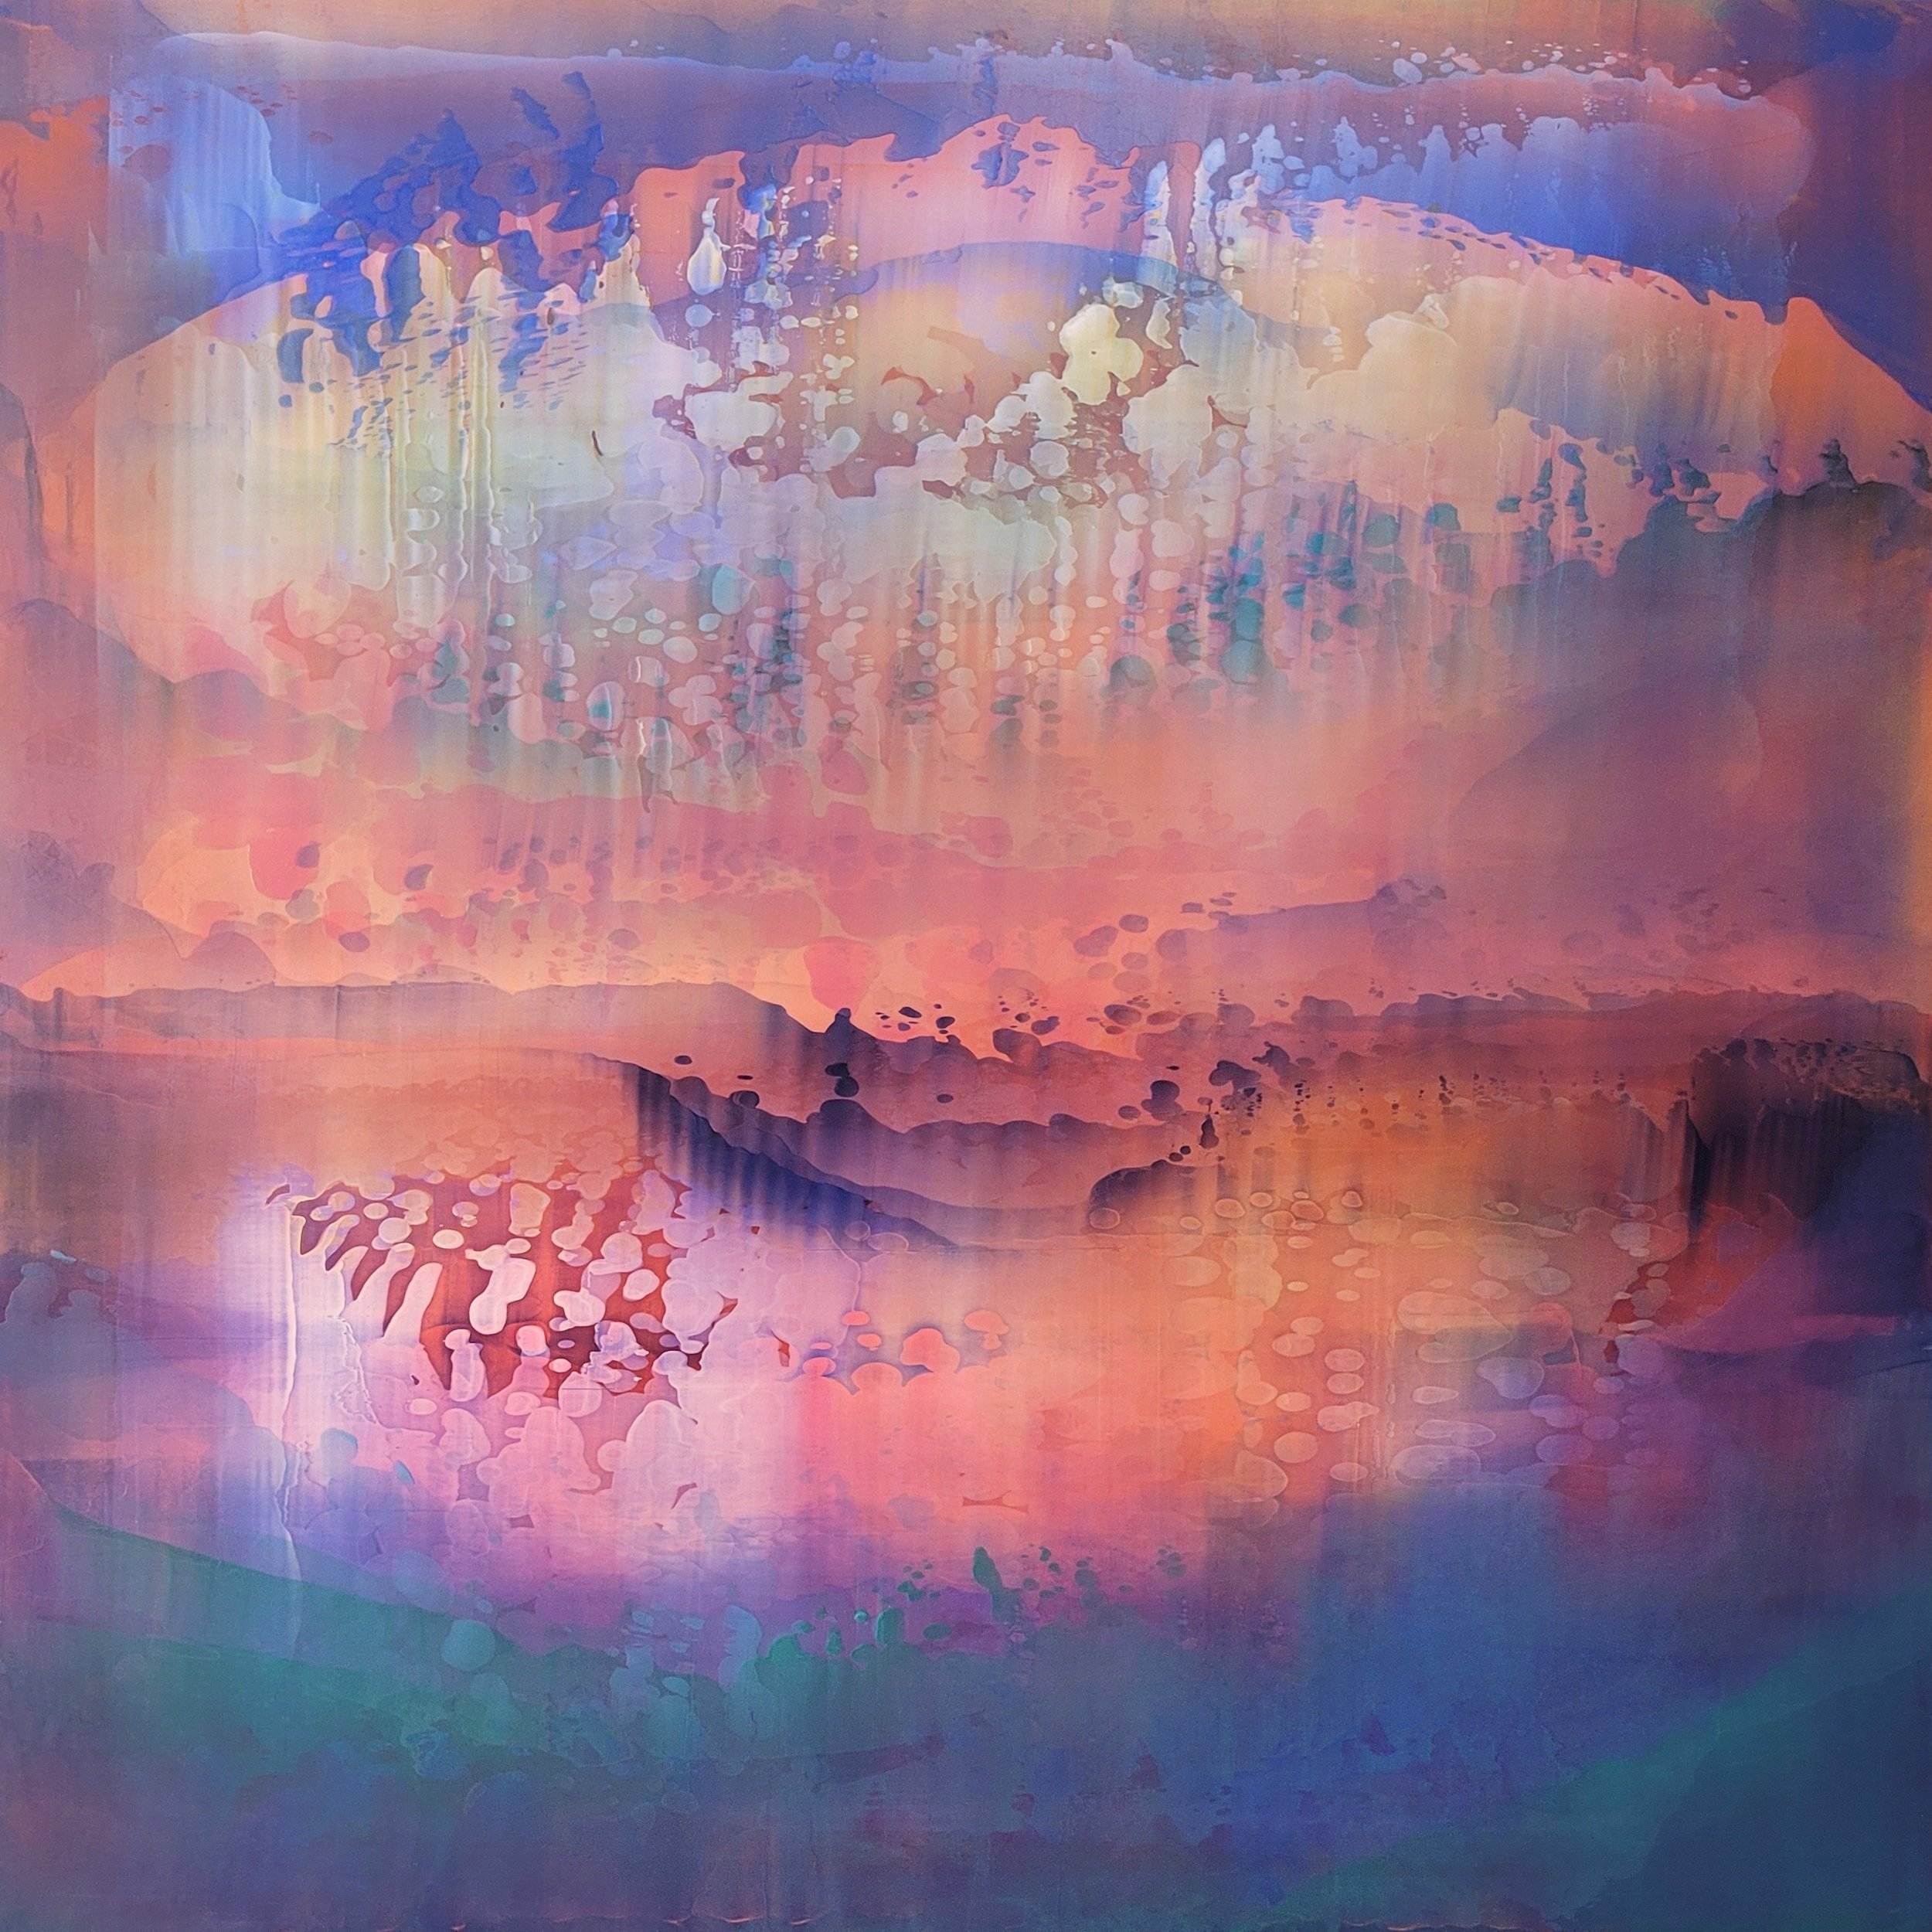 Boundless Horizons 30x30 in. sold